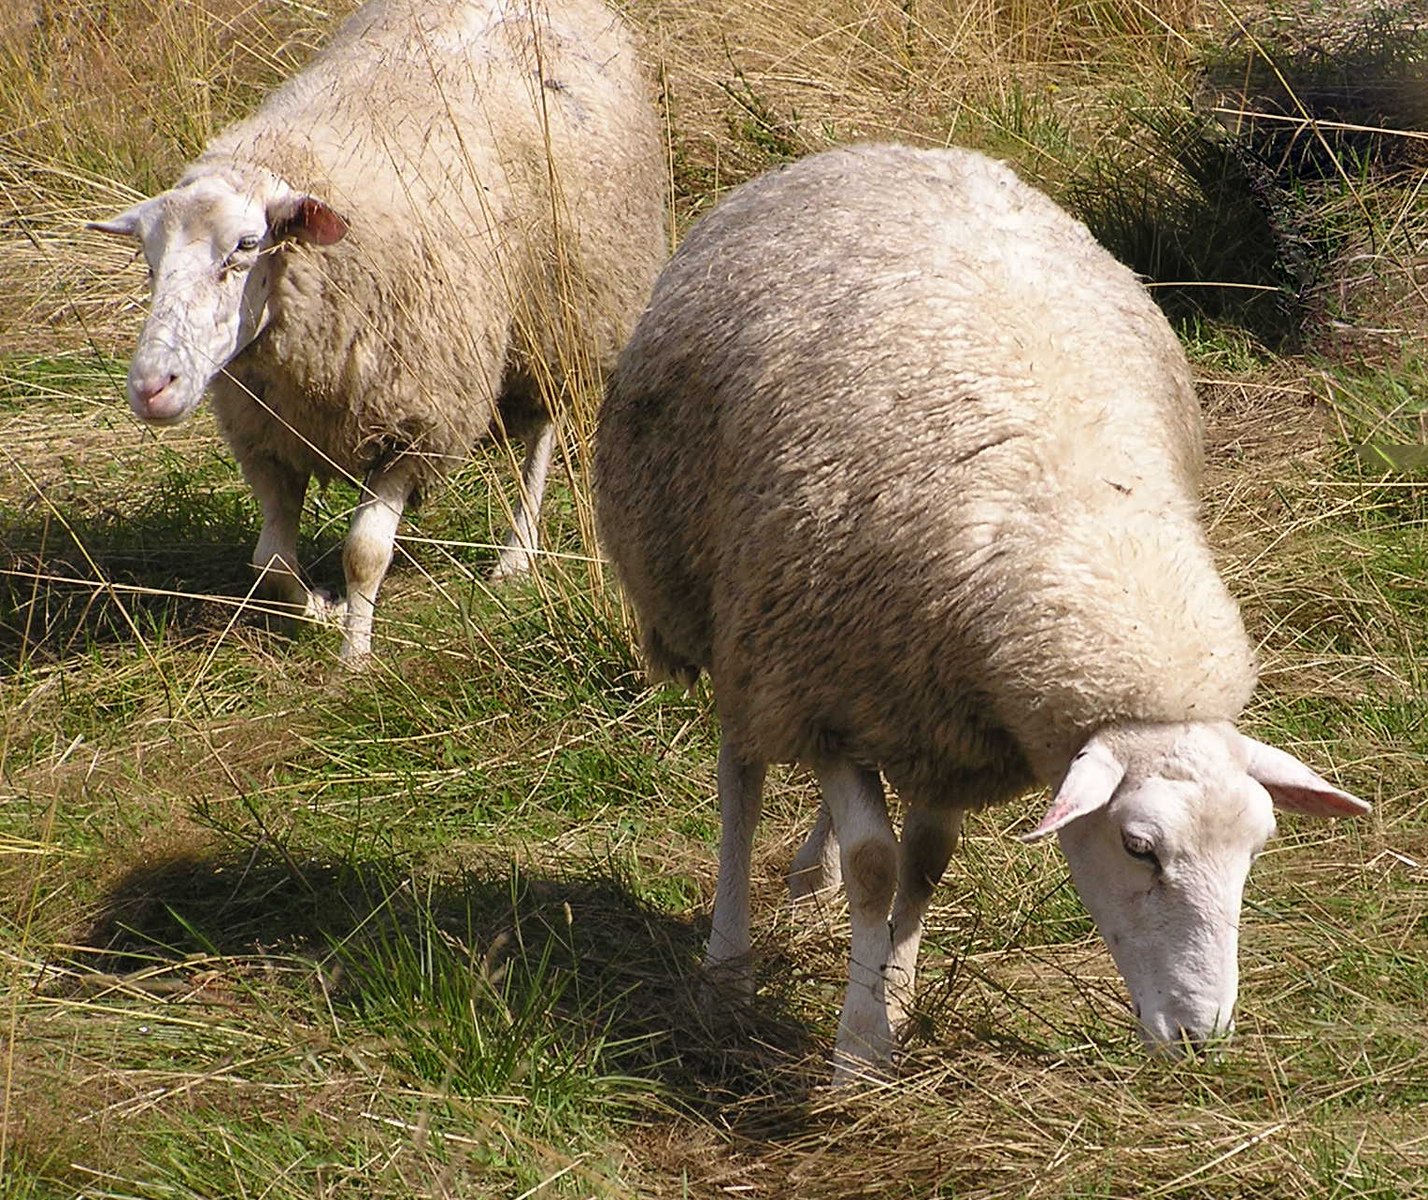 a couple of sheep are eating grass in a field